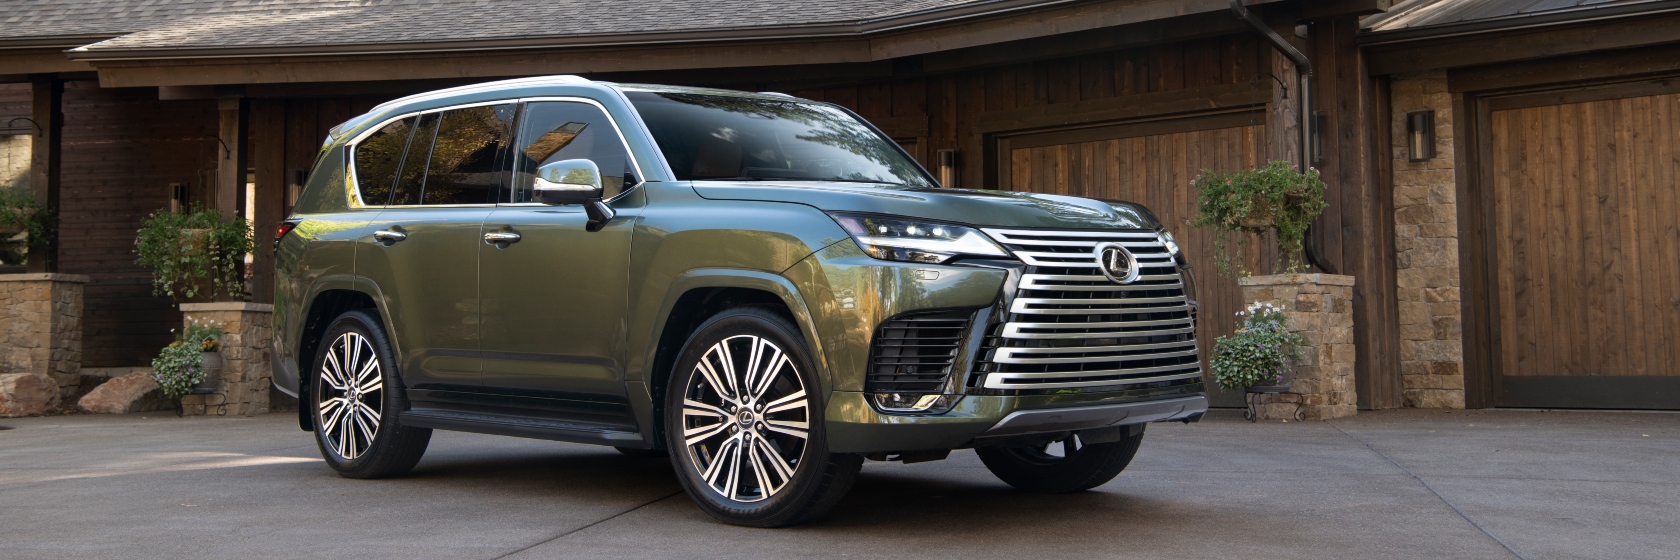 the-lexus-lx-full-size-luxury-suv-that-sets-the-standard